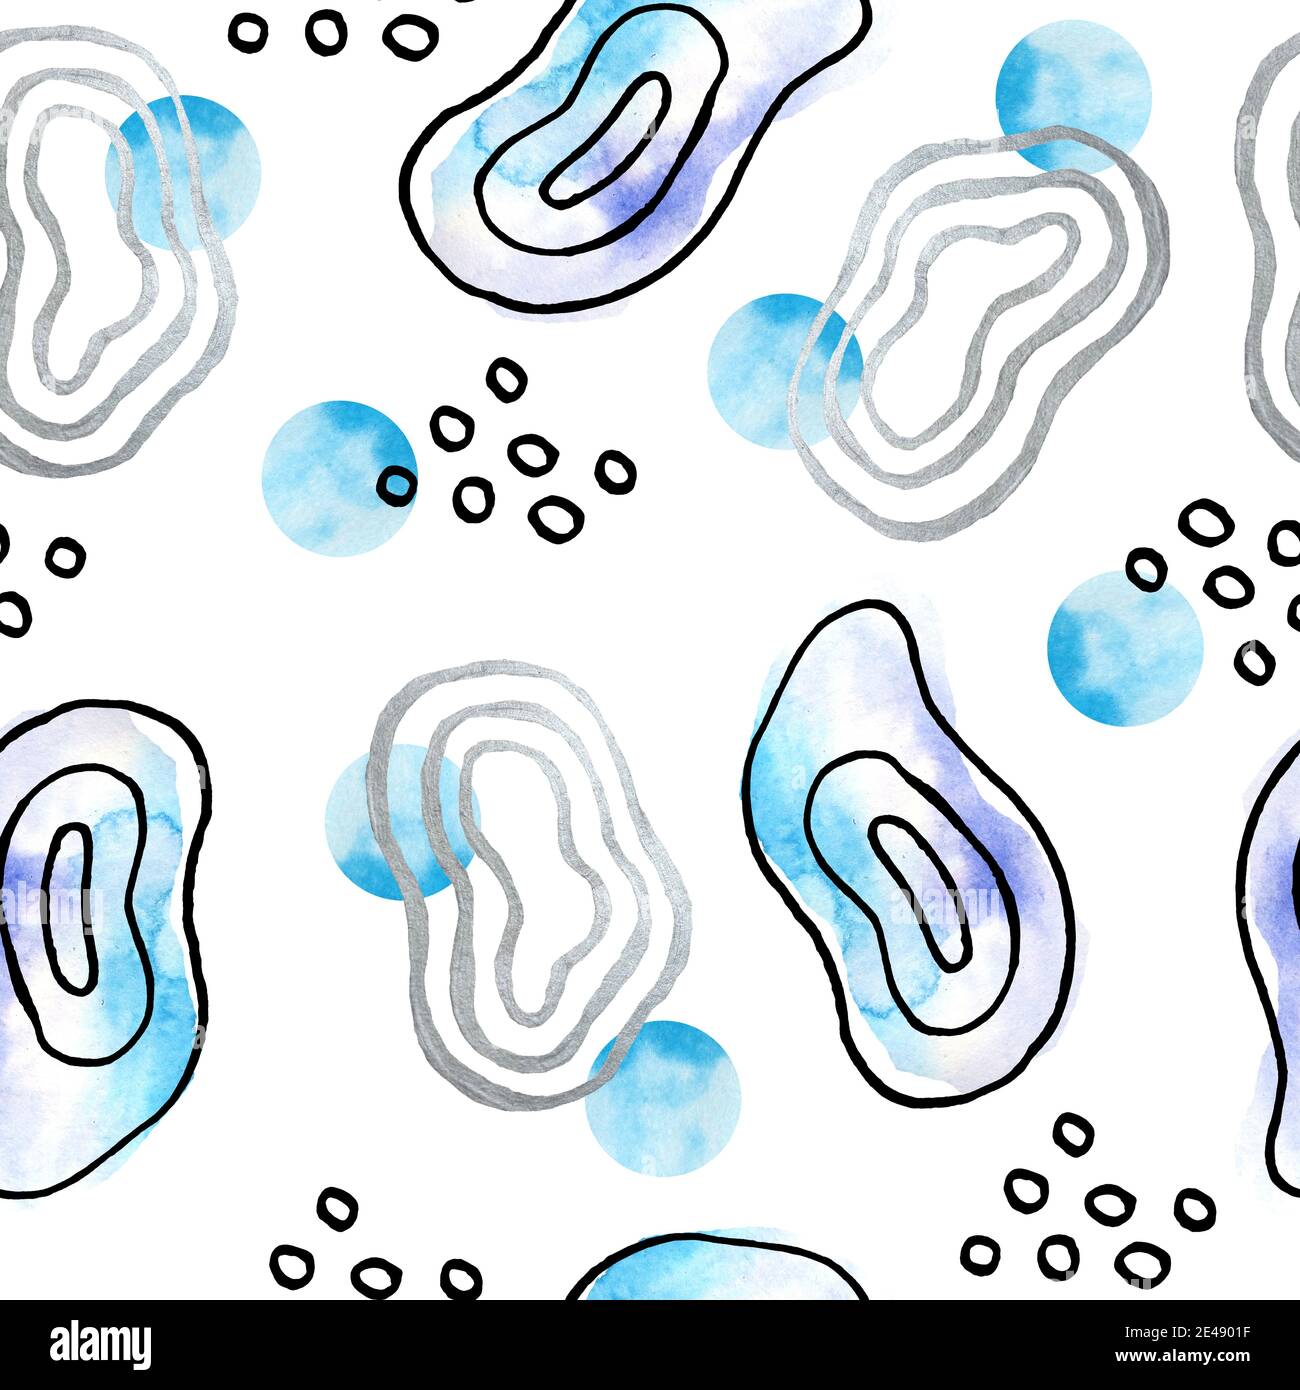 seamless hand drawn black white blue trendy contemporary graphic pattern with groups of abstract turquoise shapes spirals and watercolor polka dot circles. Doodles for textile wallpaper wrapping paper Stock Photo